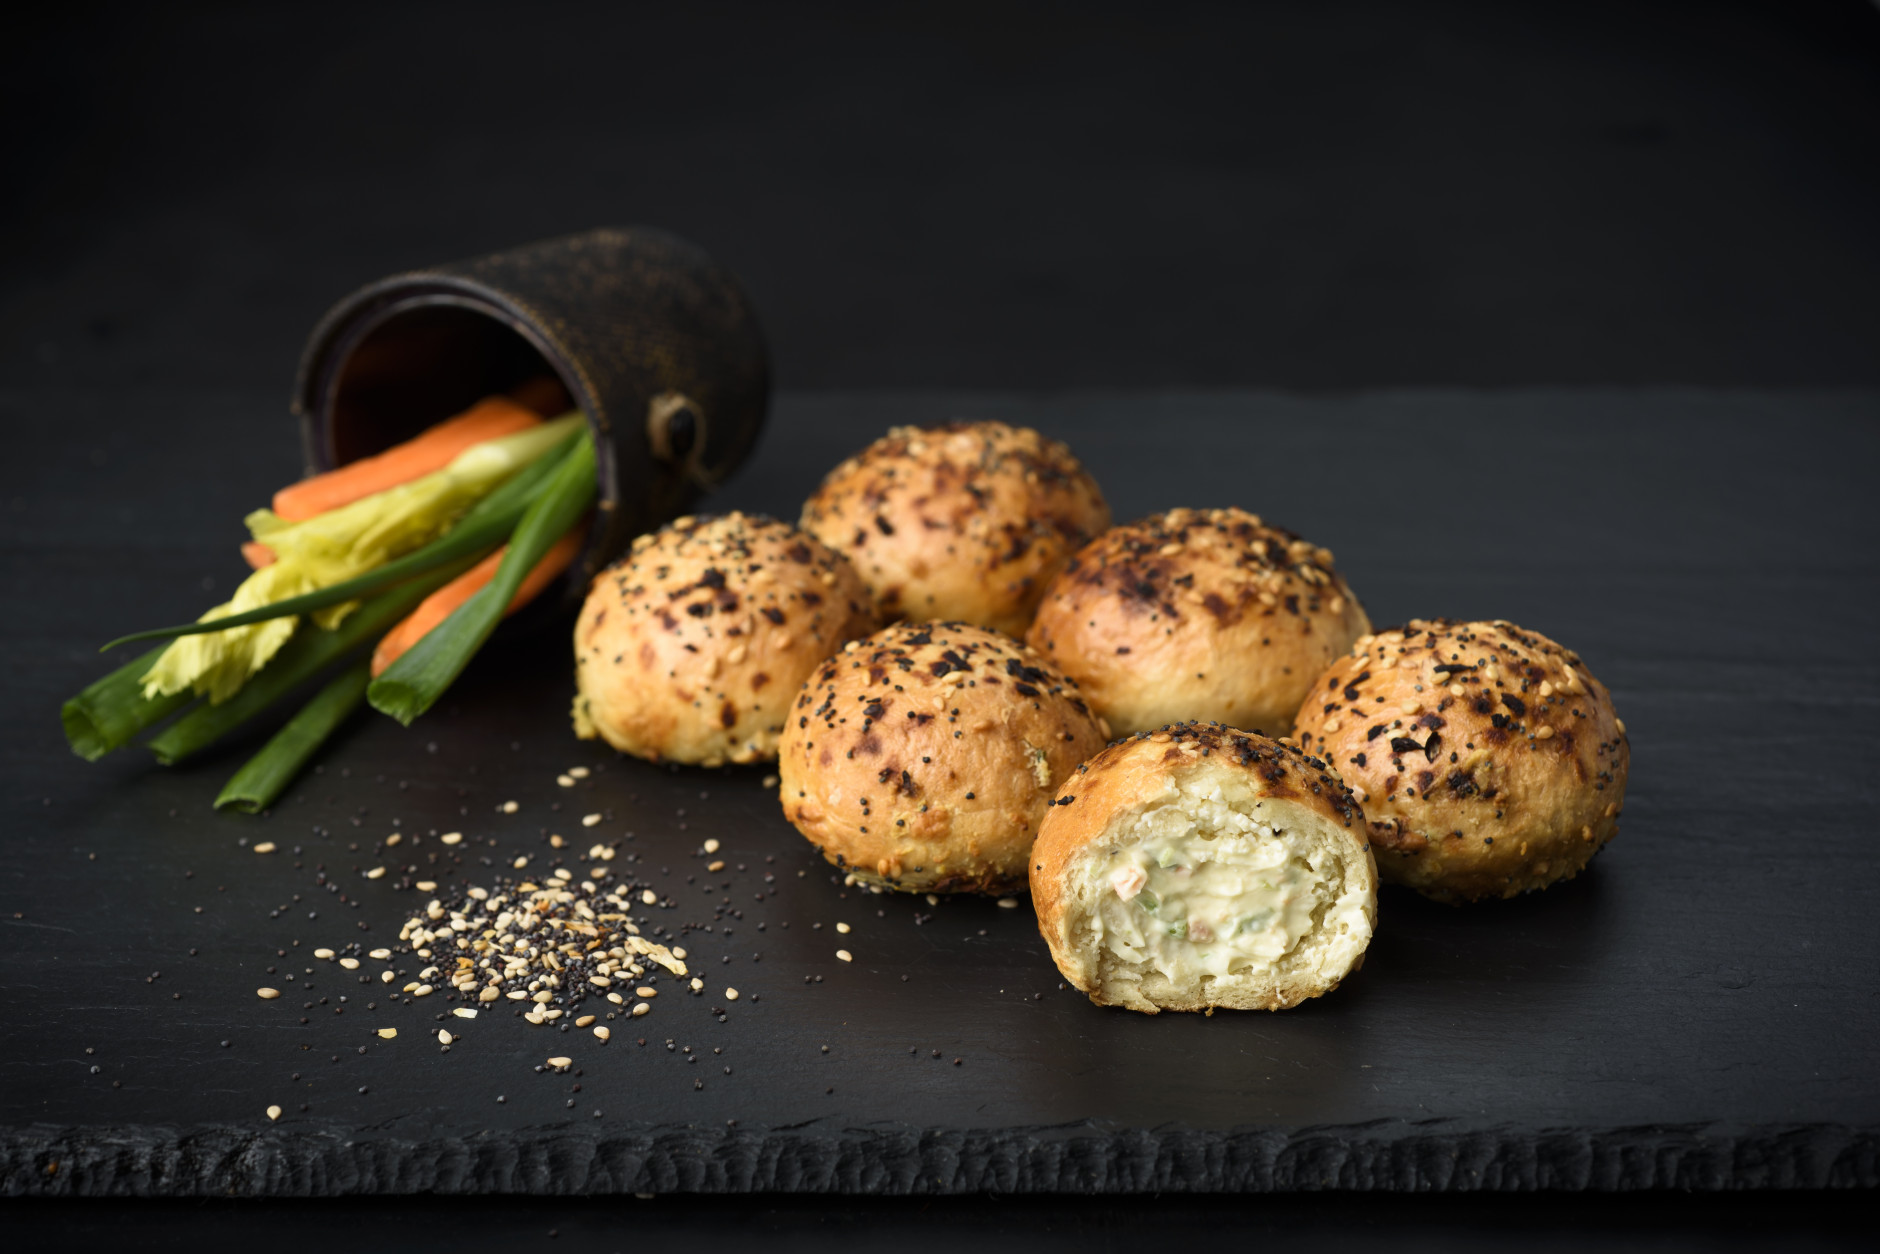 December 15, 2015 - New York, NY : Bantam Bagels "everybody's favorite" bagel balls photographed with vegetables and sesame seeds, for use on product packaging.